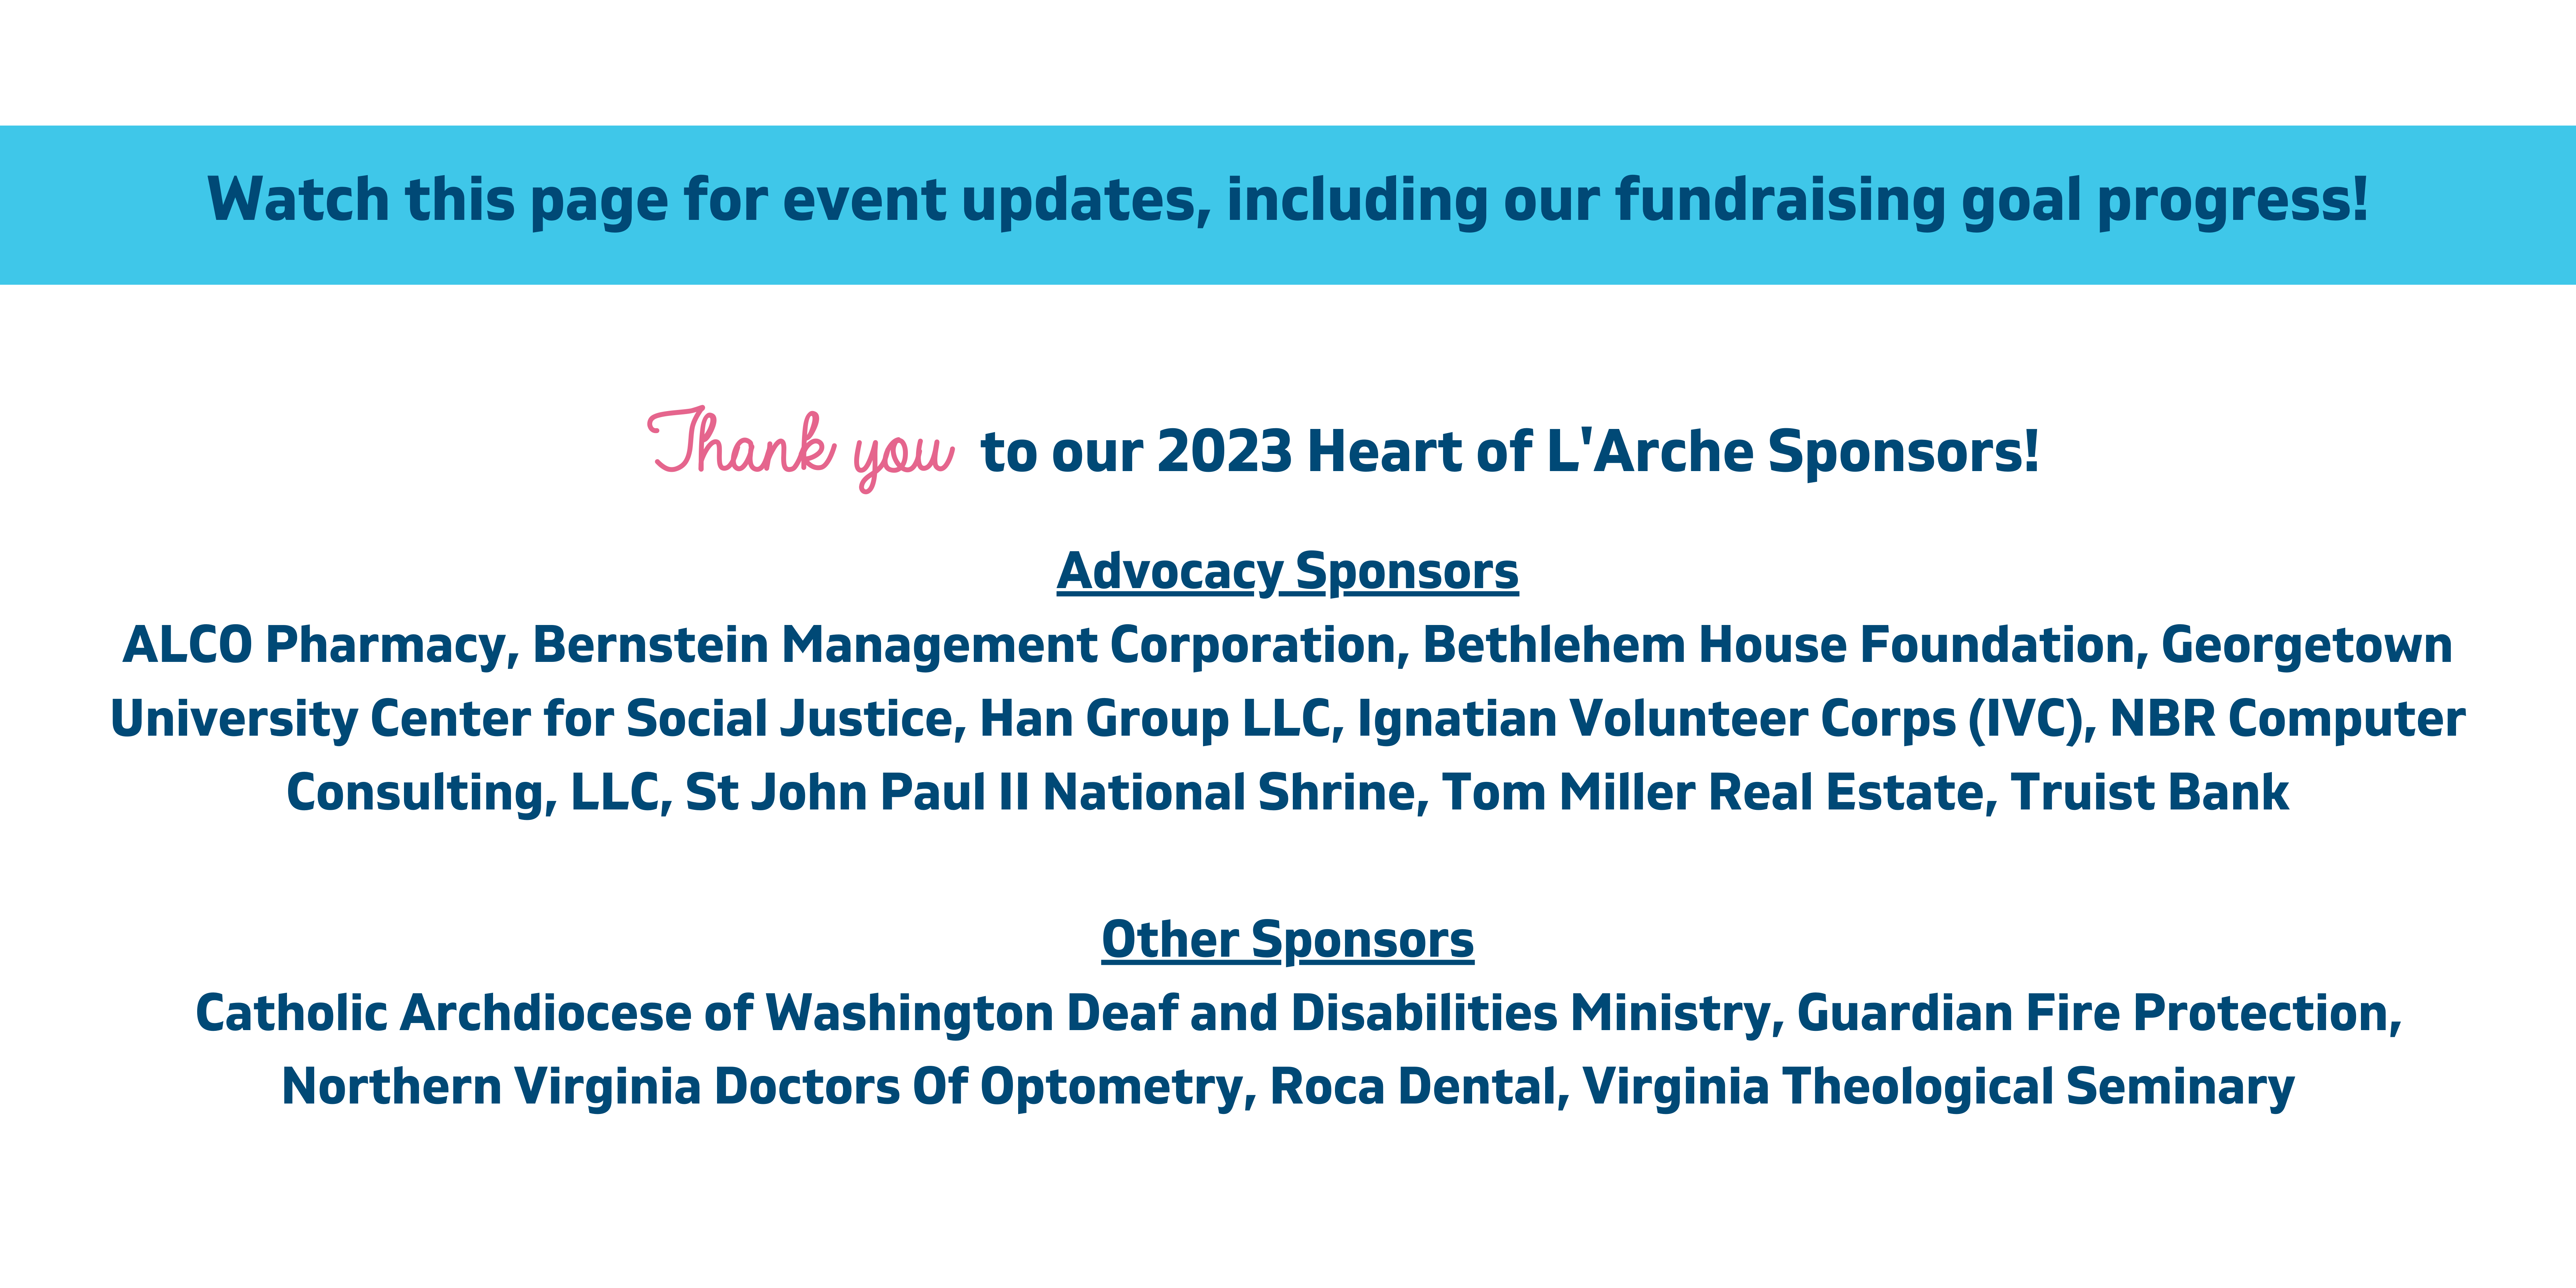 Watch this page for event updates, including our fundraising goal progress! to our 2023 Heart of L'Arche Sponsors! Advocacy Sponsors ALCO Pharmacy, Bernstein Management Corporation, Bethlehem House Foundation, Georgetown University Center for Social Justice, Han Group LLC, Ignatian Volunteer Corps (IVC), NBR Computer Consulting, LLC, St John Paul II National Shrine, Tom Miller Real Estate, Truist Bank Other Sponsors Catholic Archdiocese of Washington Deaf and Disabilities Ministry, Guardian Fire Protection, Northern Virginia Doctors of Optometry, Roca Dental, Virginia Theological Seminary